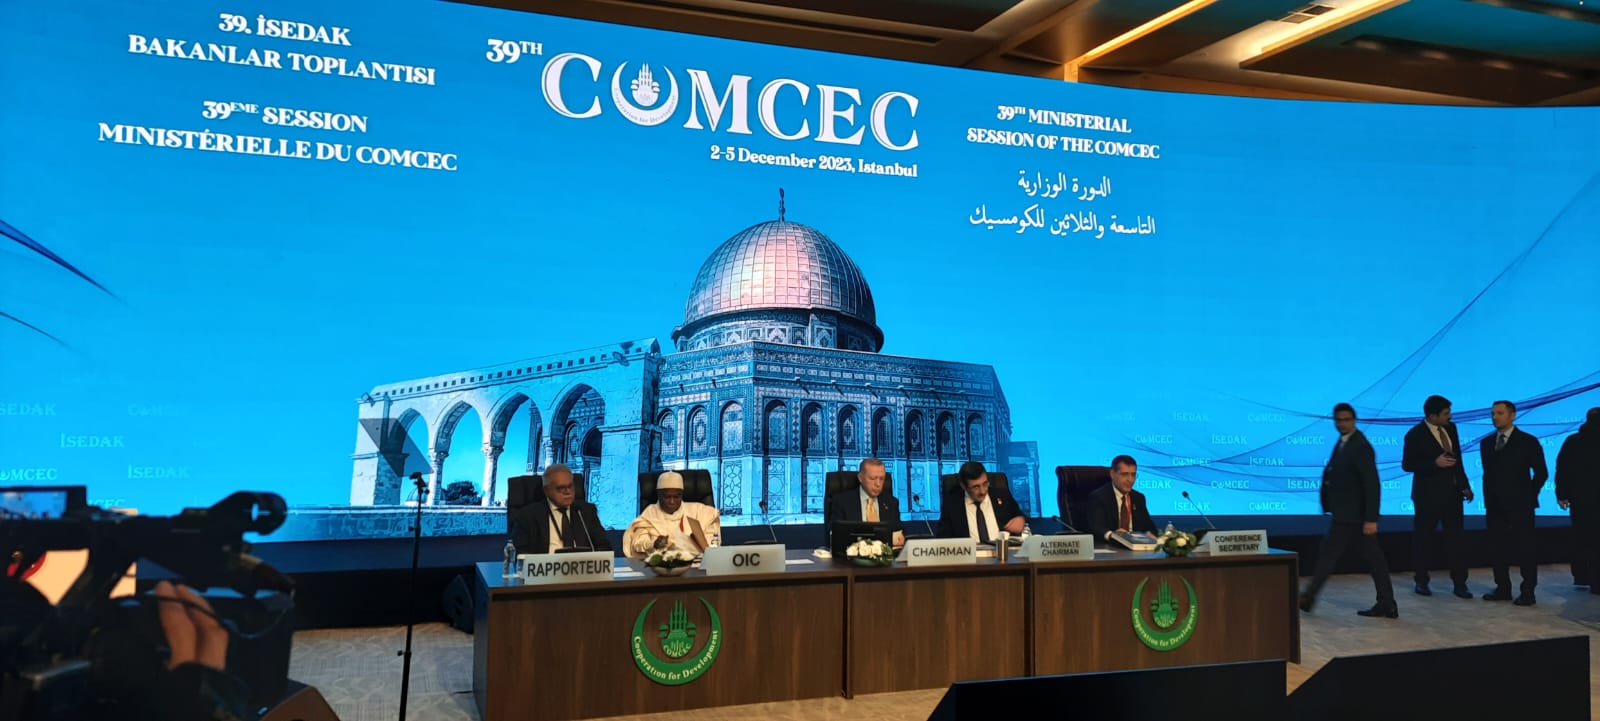 39th Ministerial Session of COMCEC